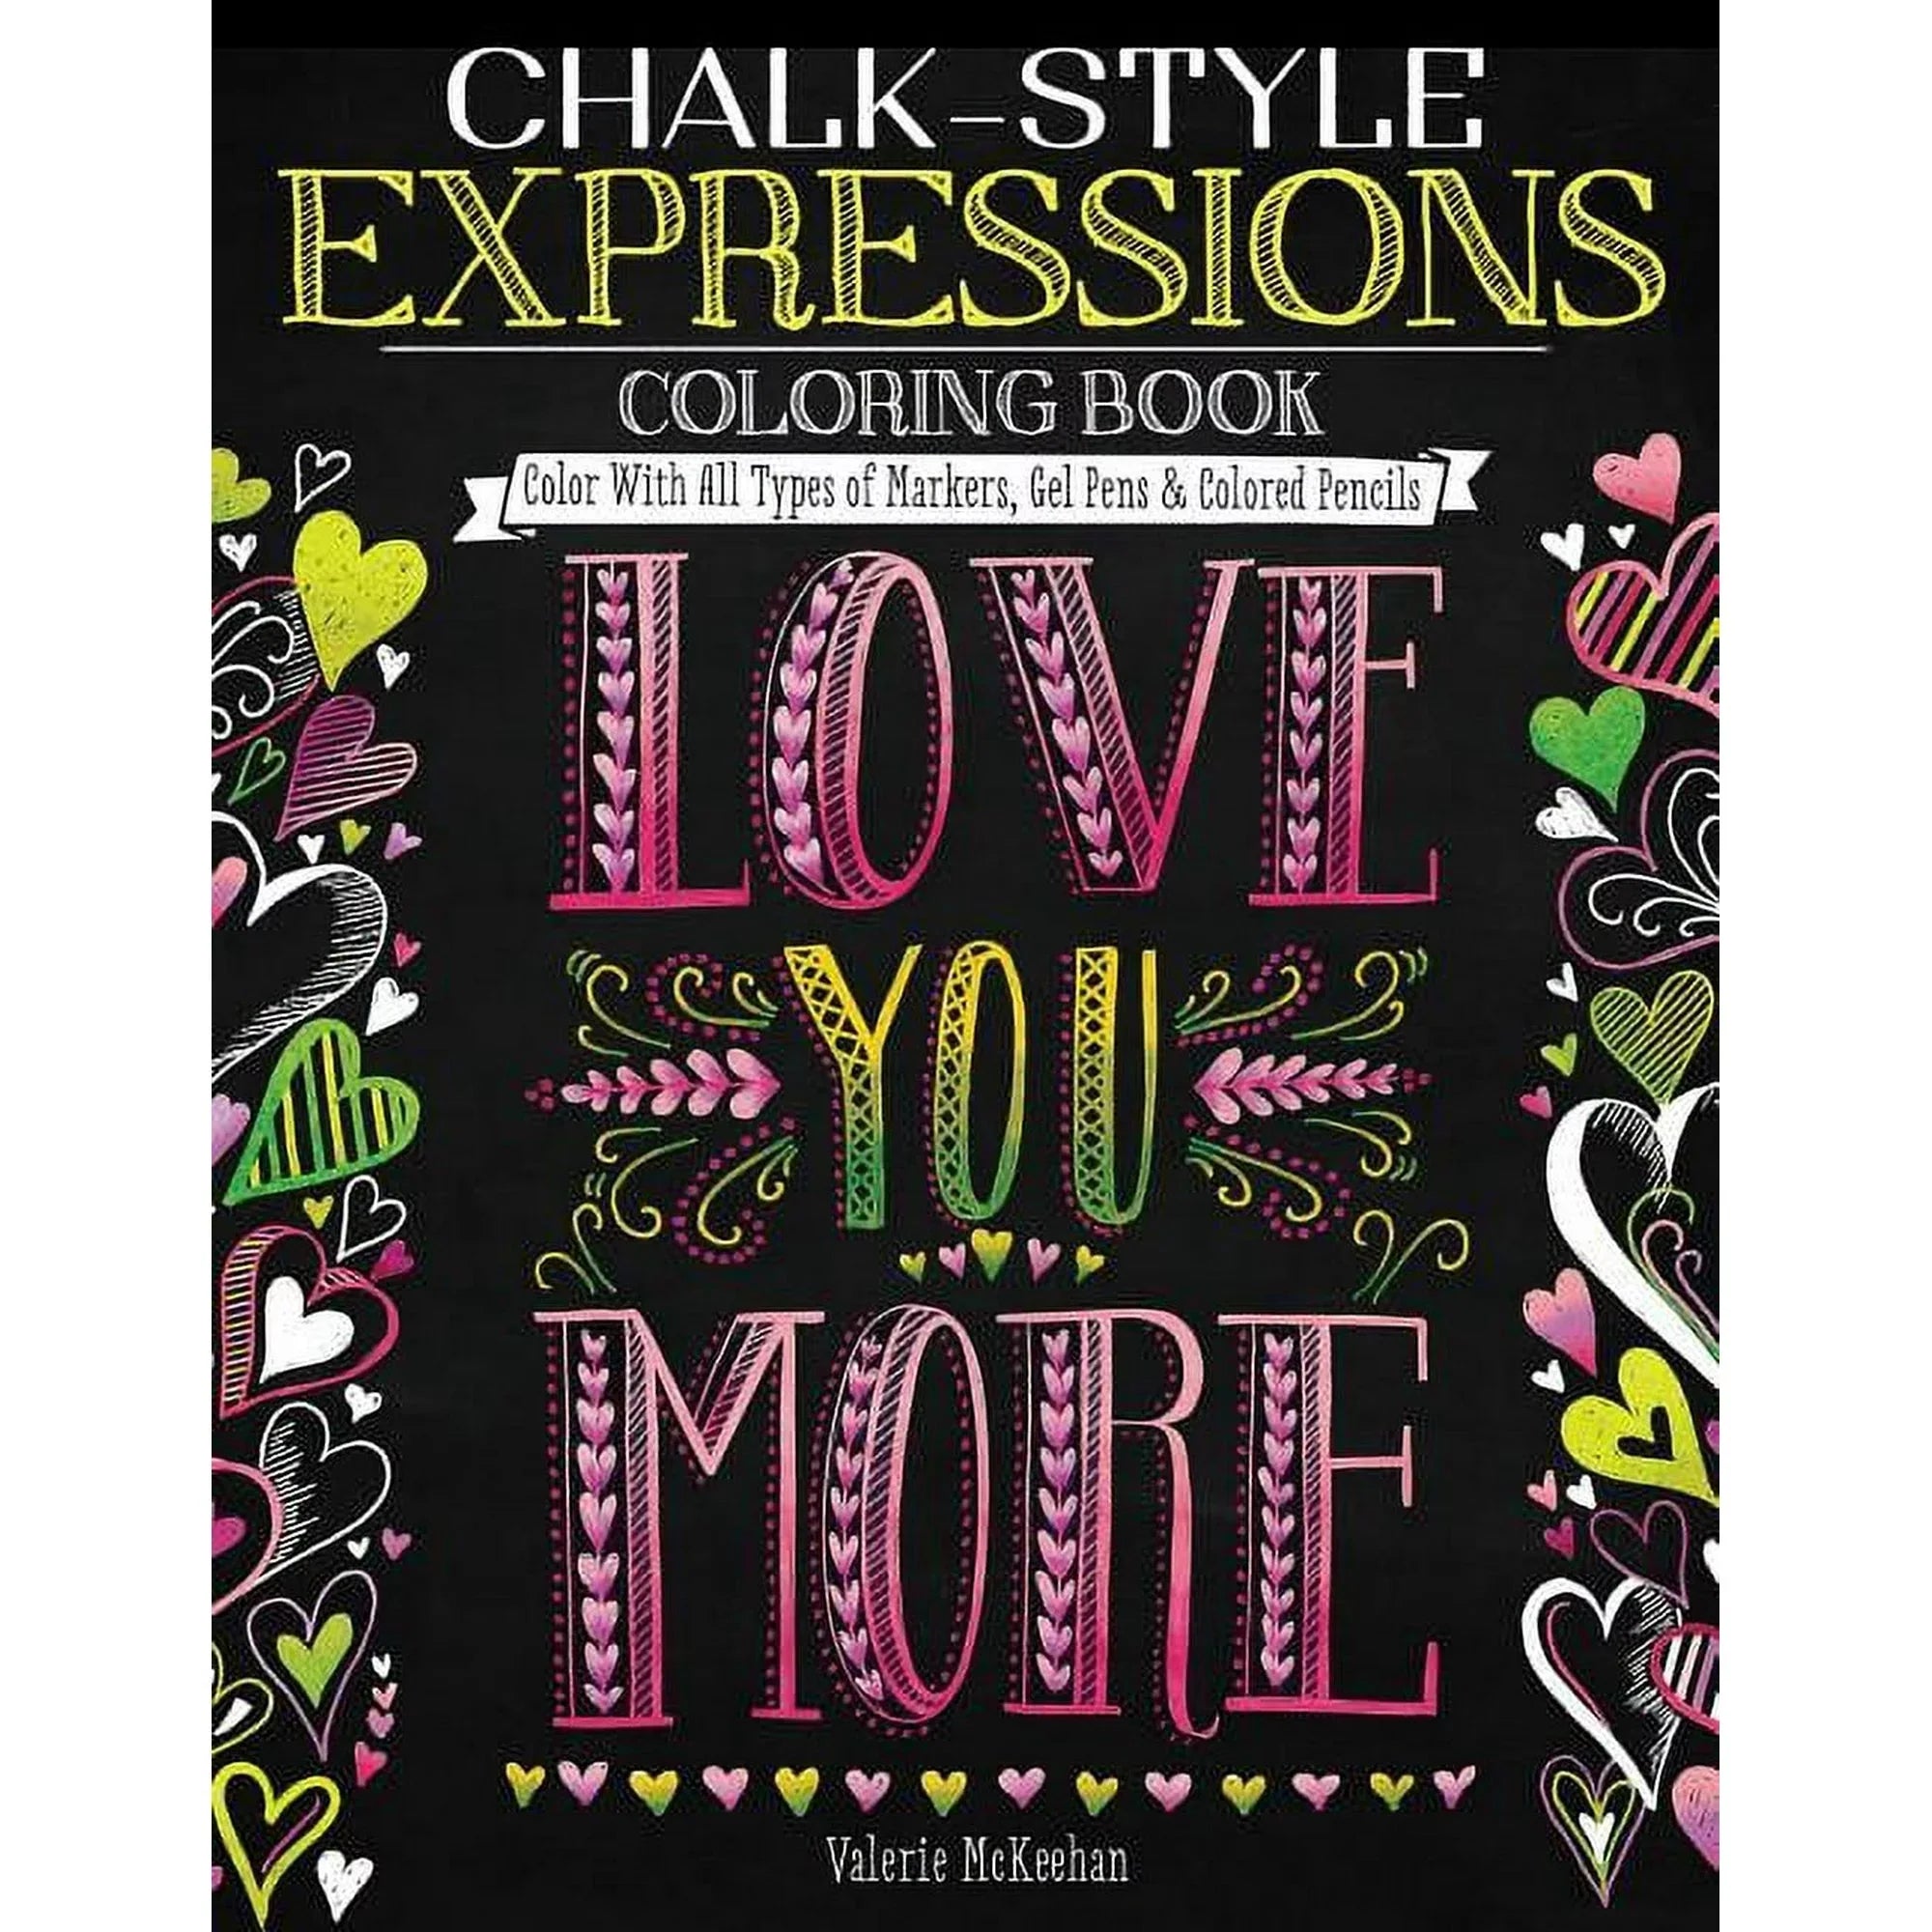 Wholesale prices with free shipping all over United States Chalk-Style Expressions Coloring Book: Color With All Types of Markers, Gel Pens Colored Pencils - Steven Deals